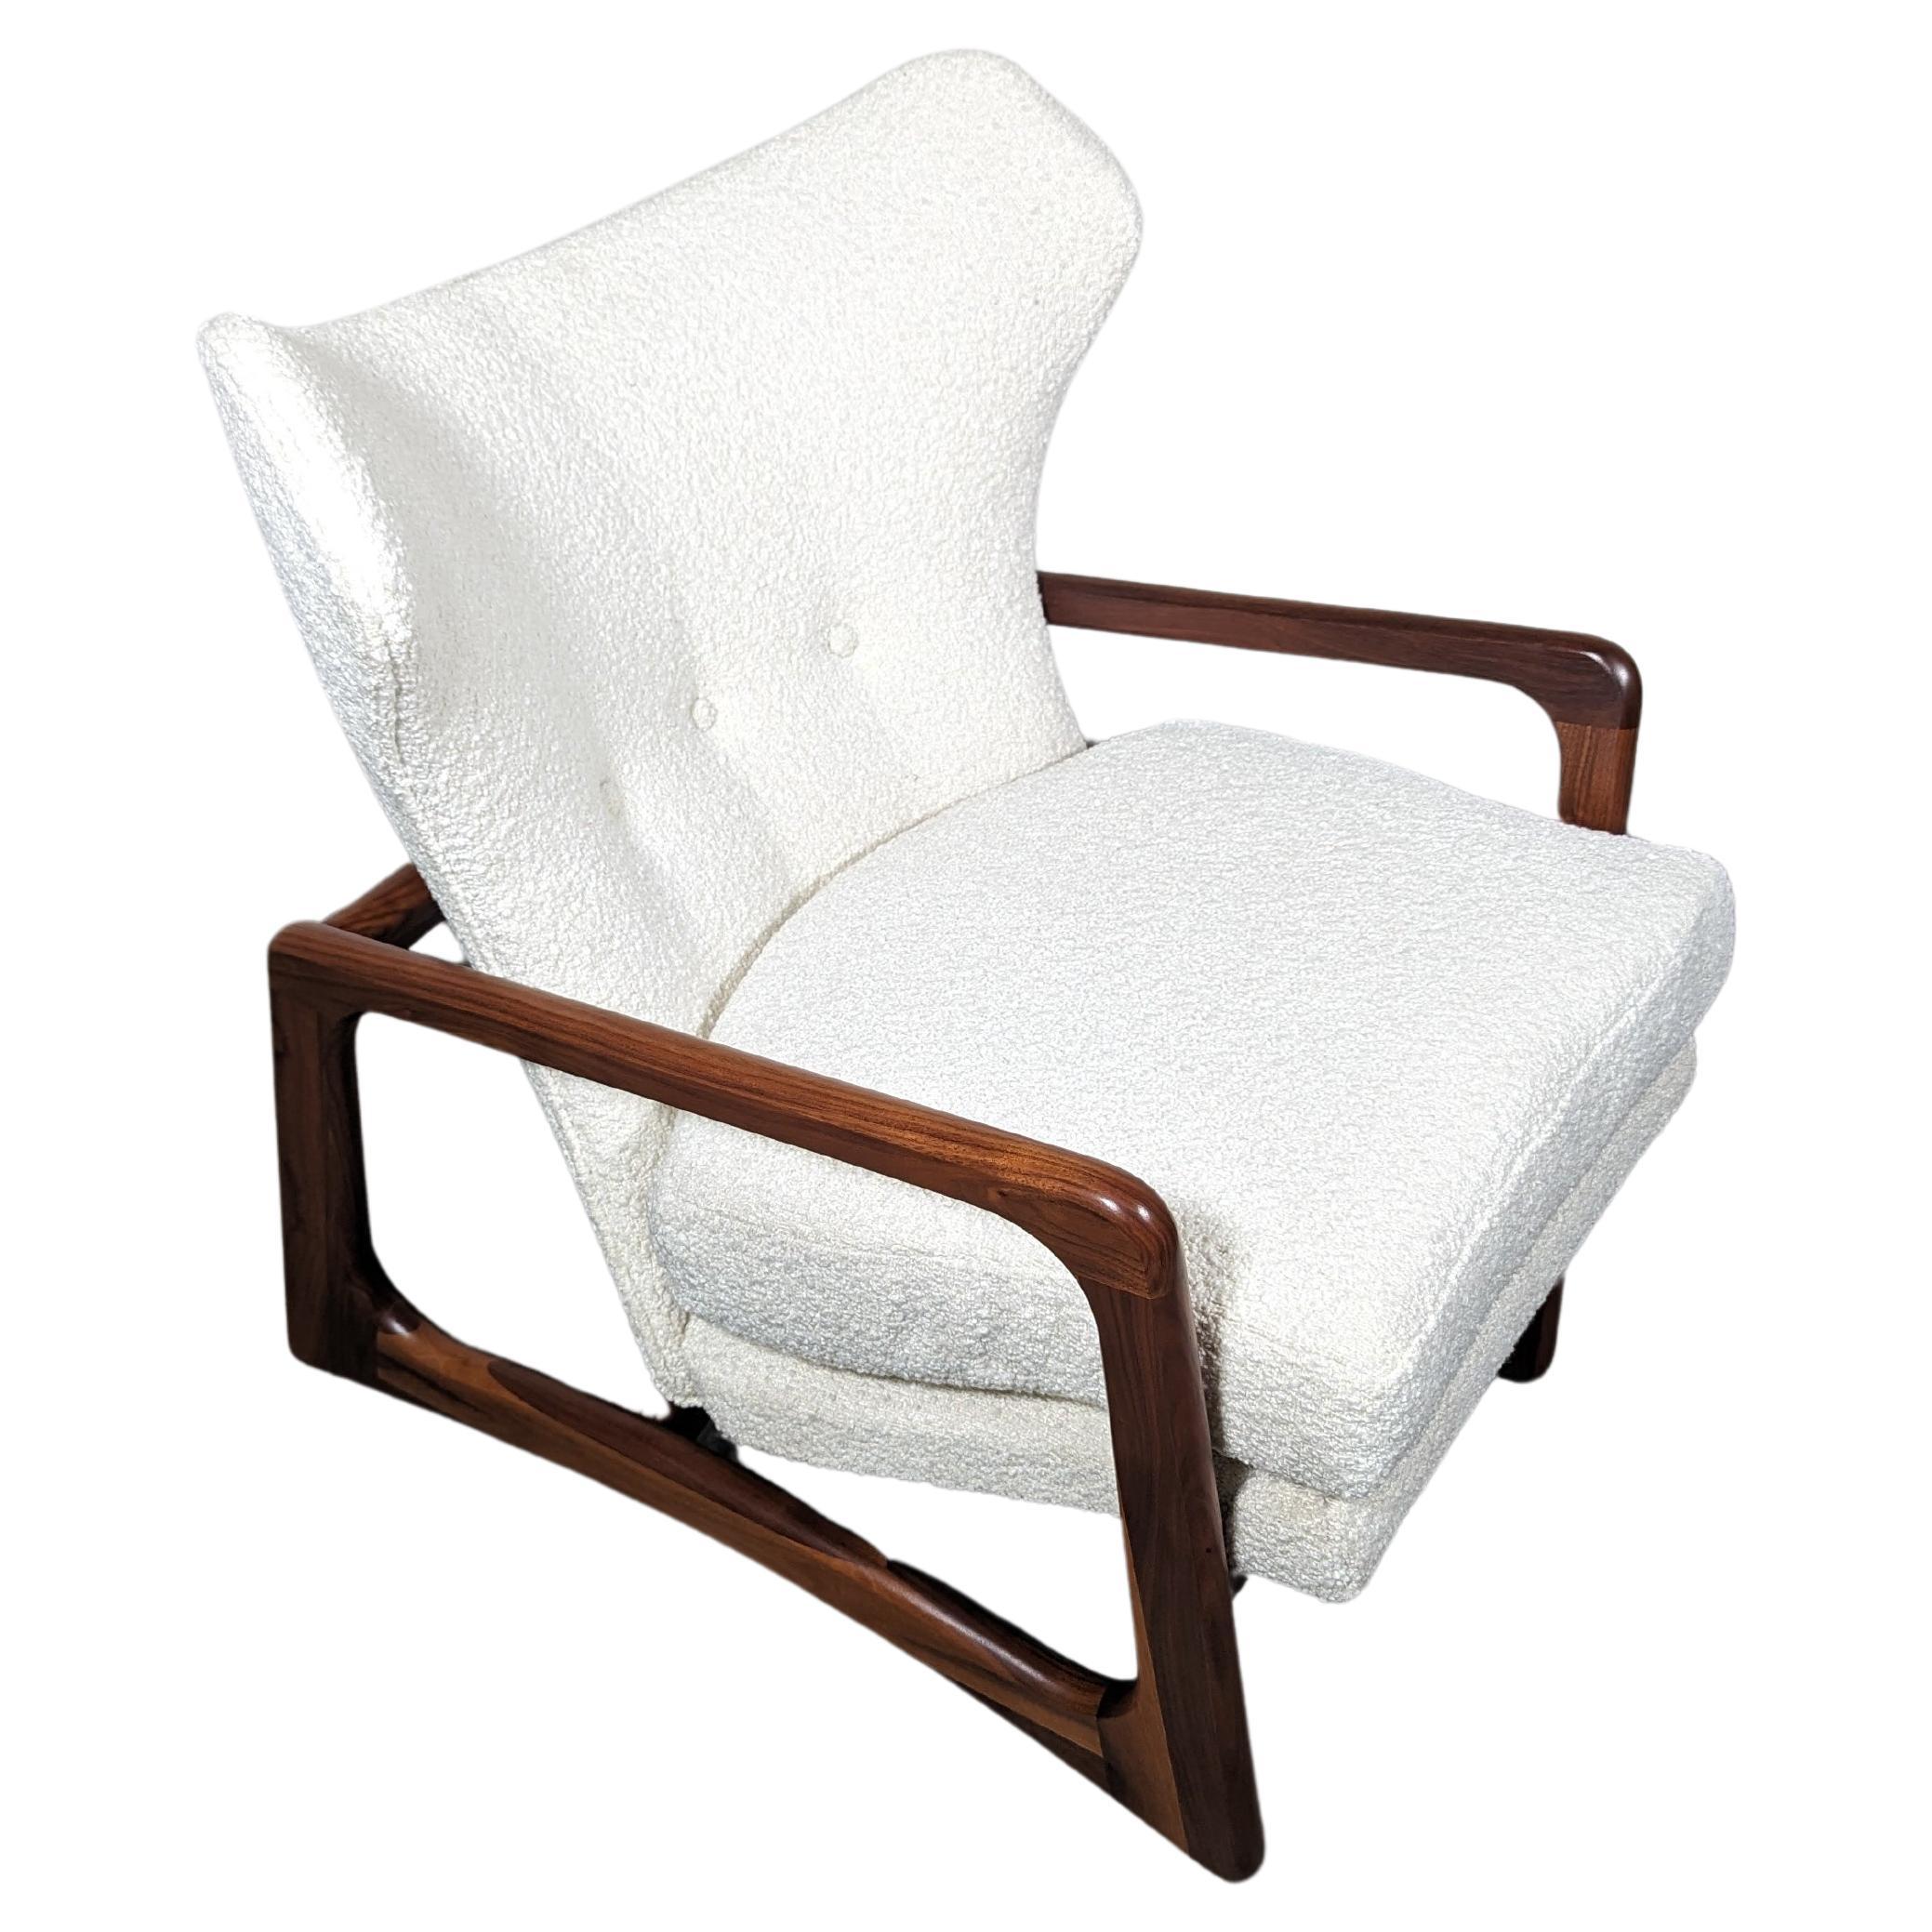 Step back in time with this stunning example of Mid Century Modern design - an authentic Model 2466-C Lounge Chair, conceived by the celebrated designer Adrian Pearsall. Known for his avant-garde approach and bold interpretations of modern